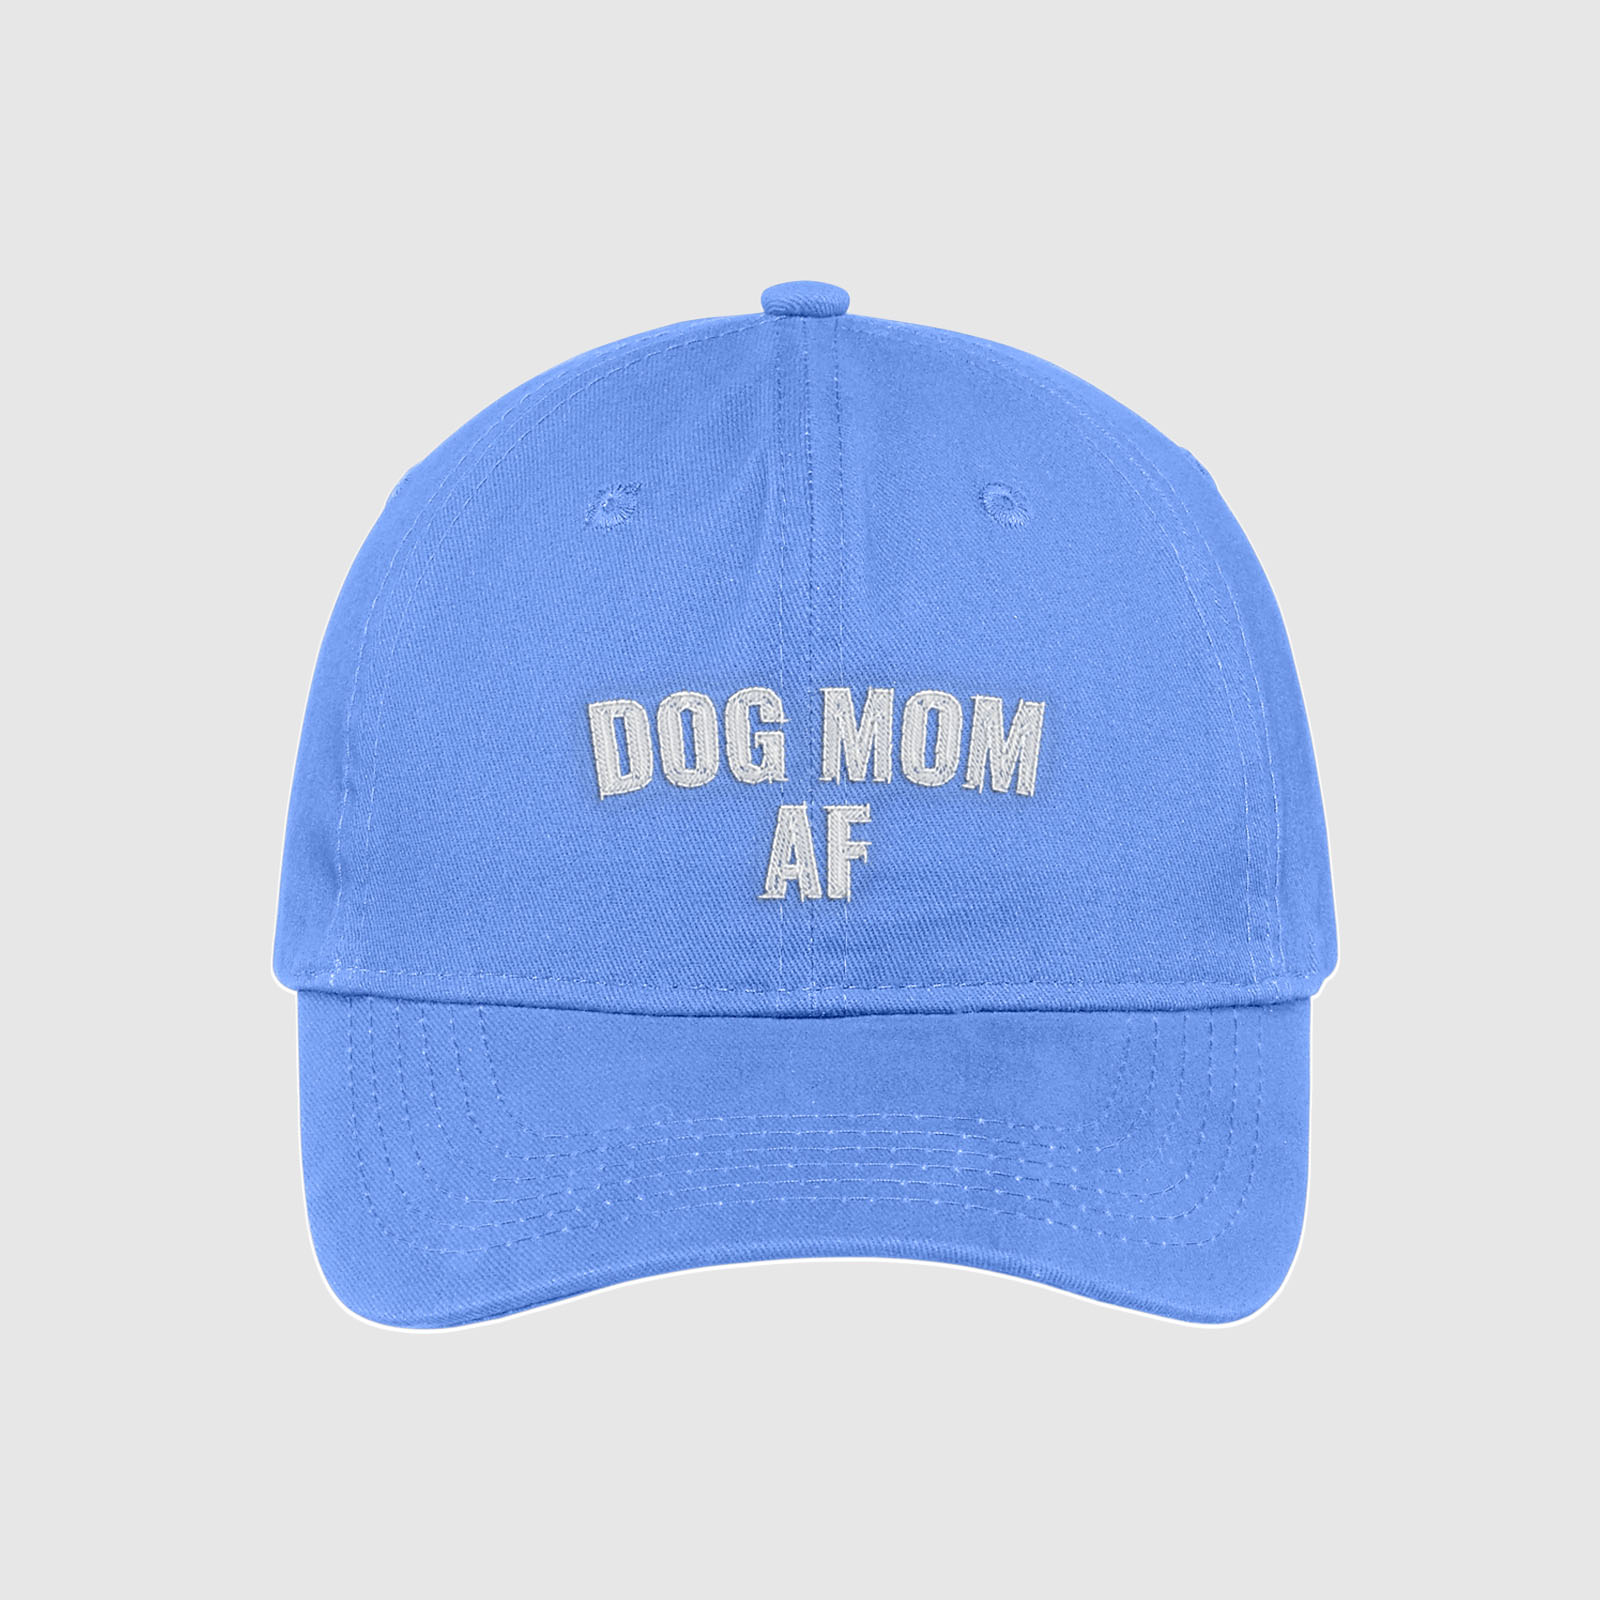 Blue Dog Mom AF Hat embroidered with white text.